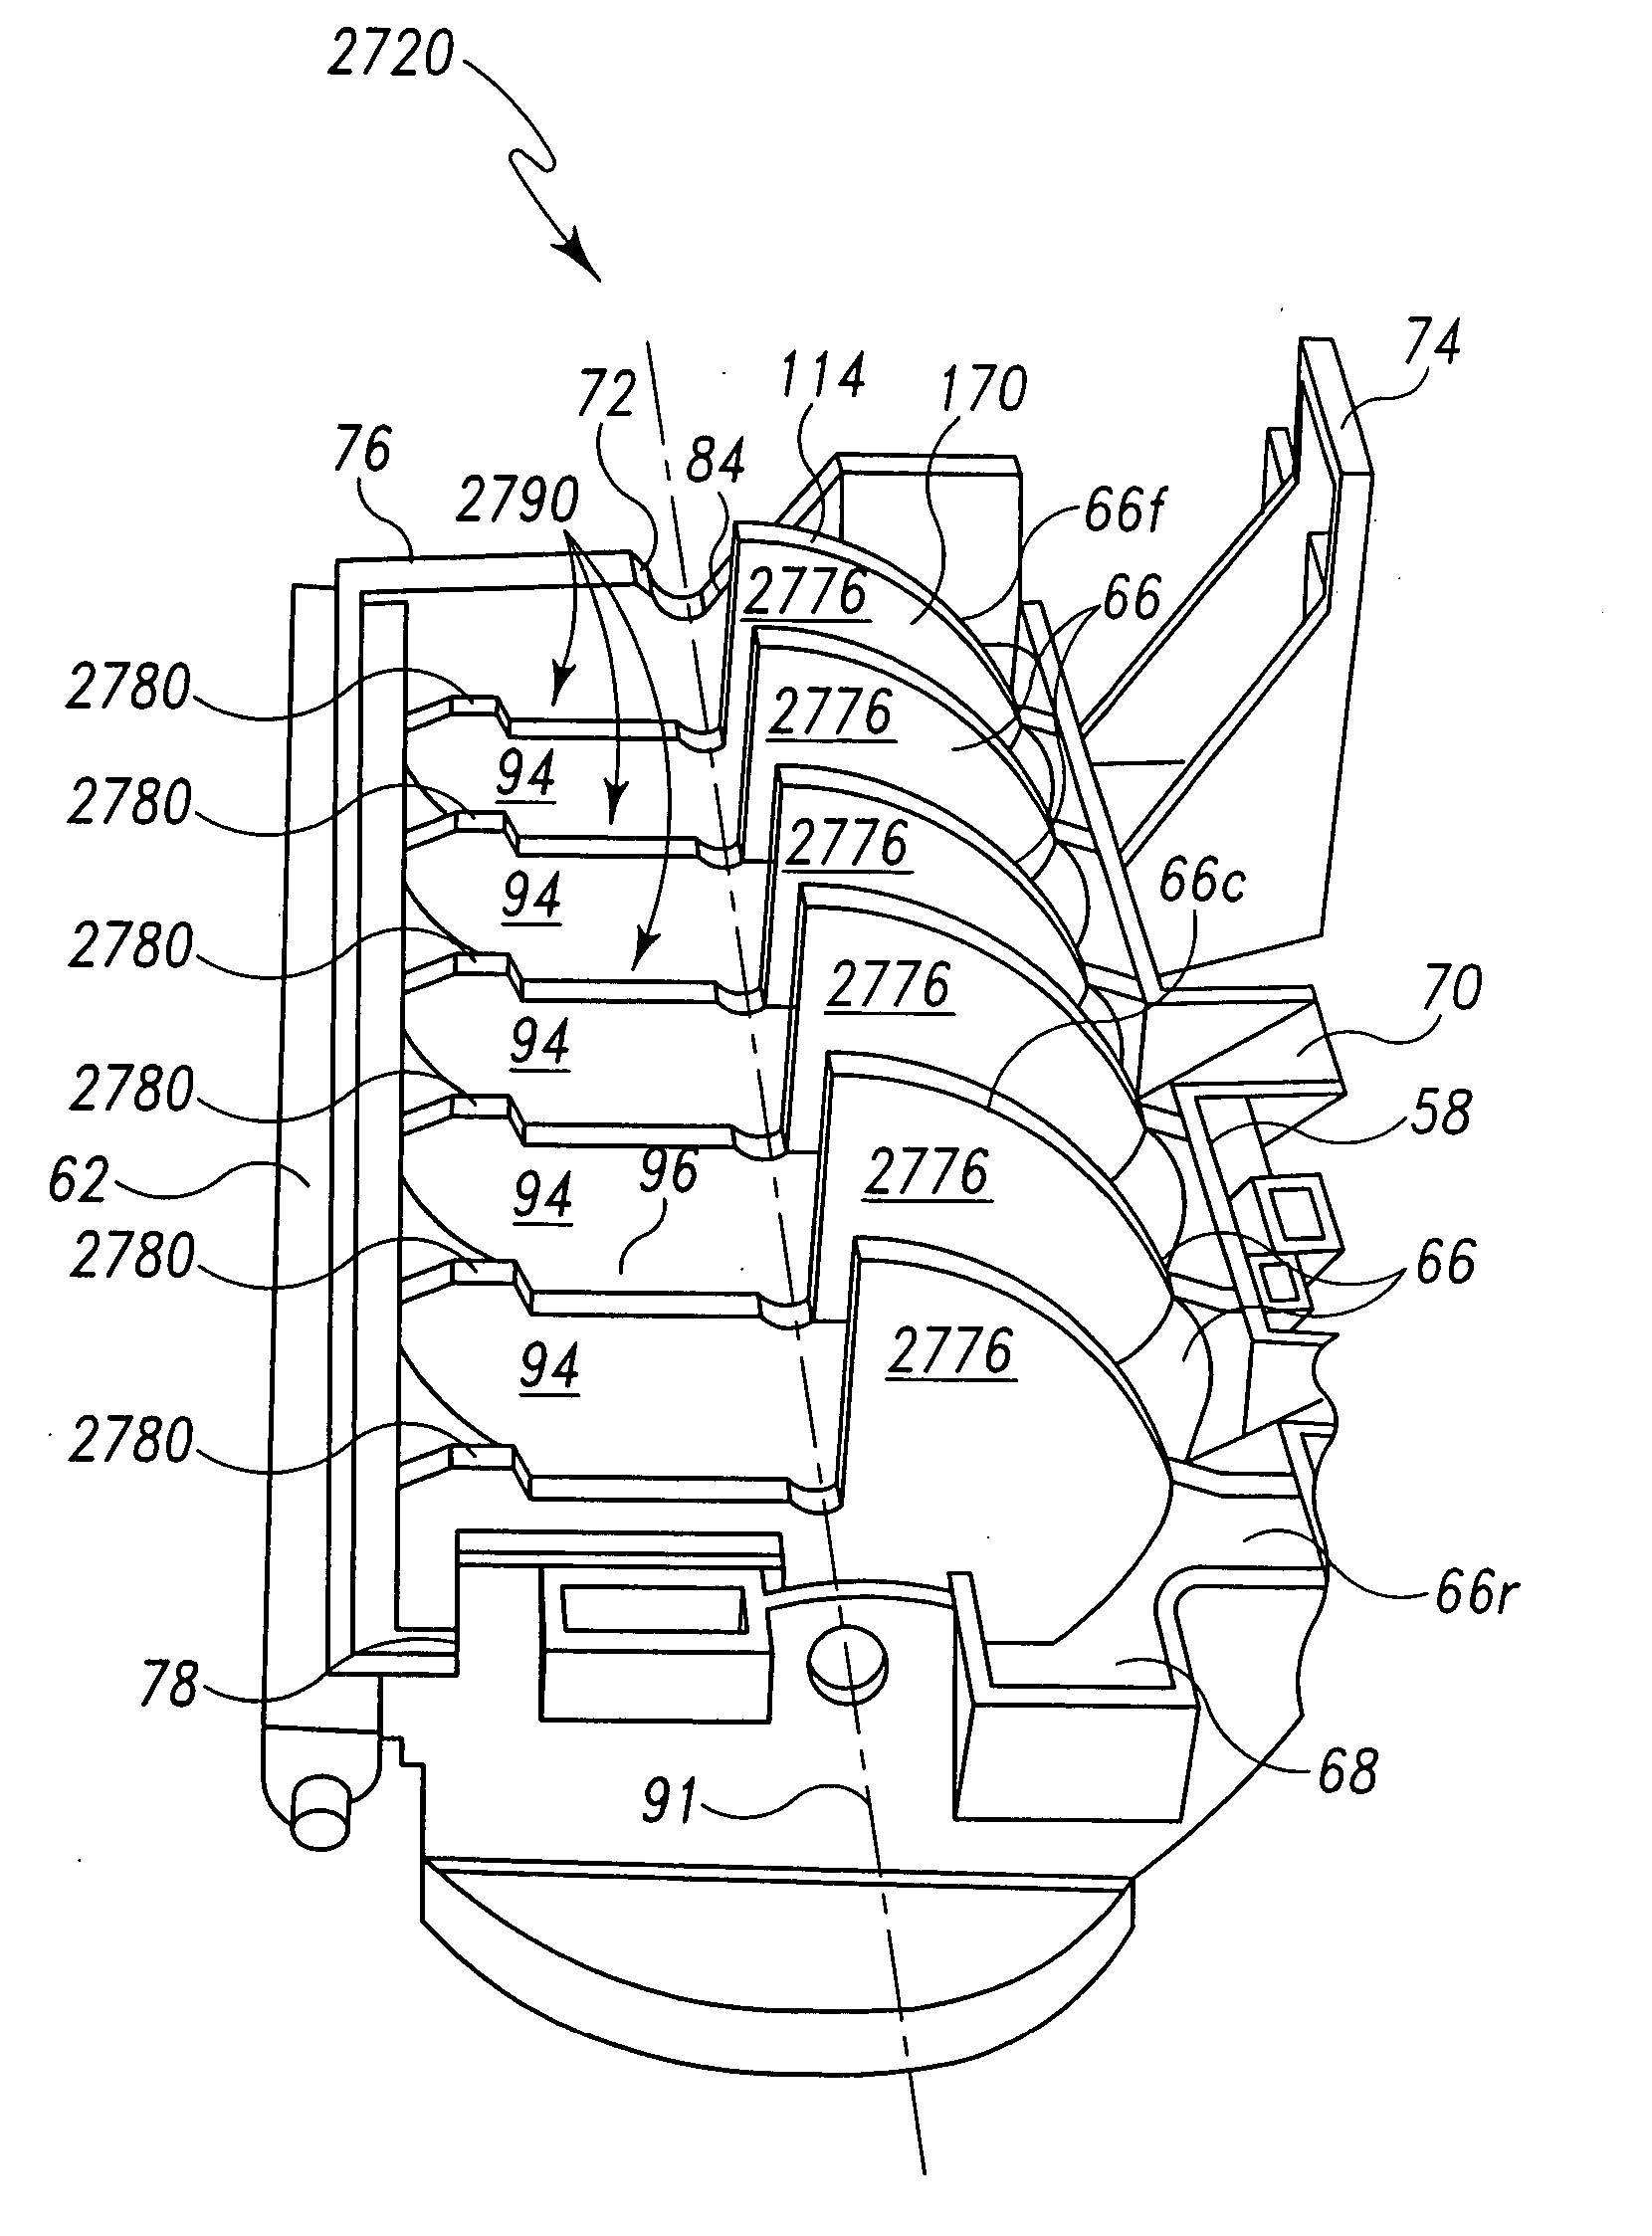 Method and device for eliminating connecting webs between ice cubes